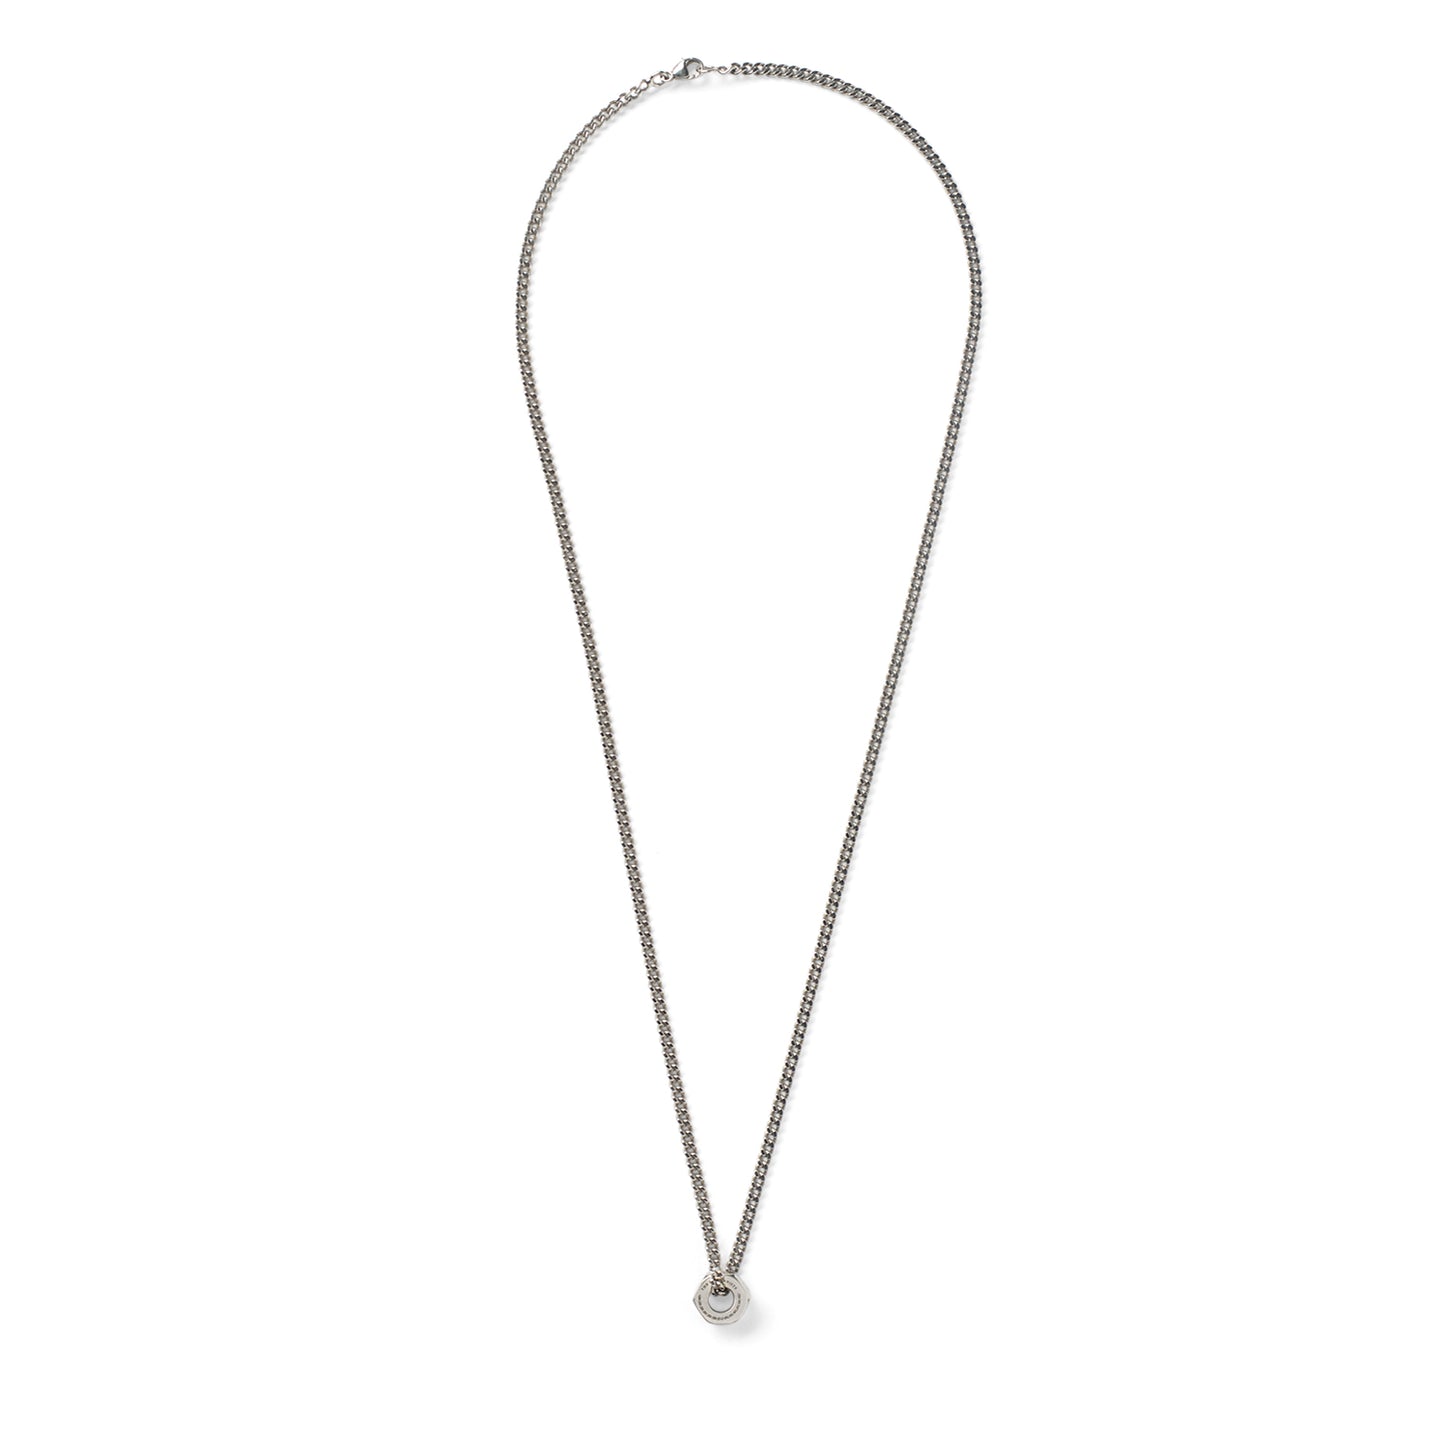 The Ecrou Necklace Sterling Silver 925